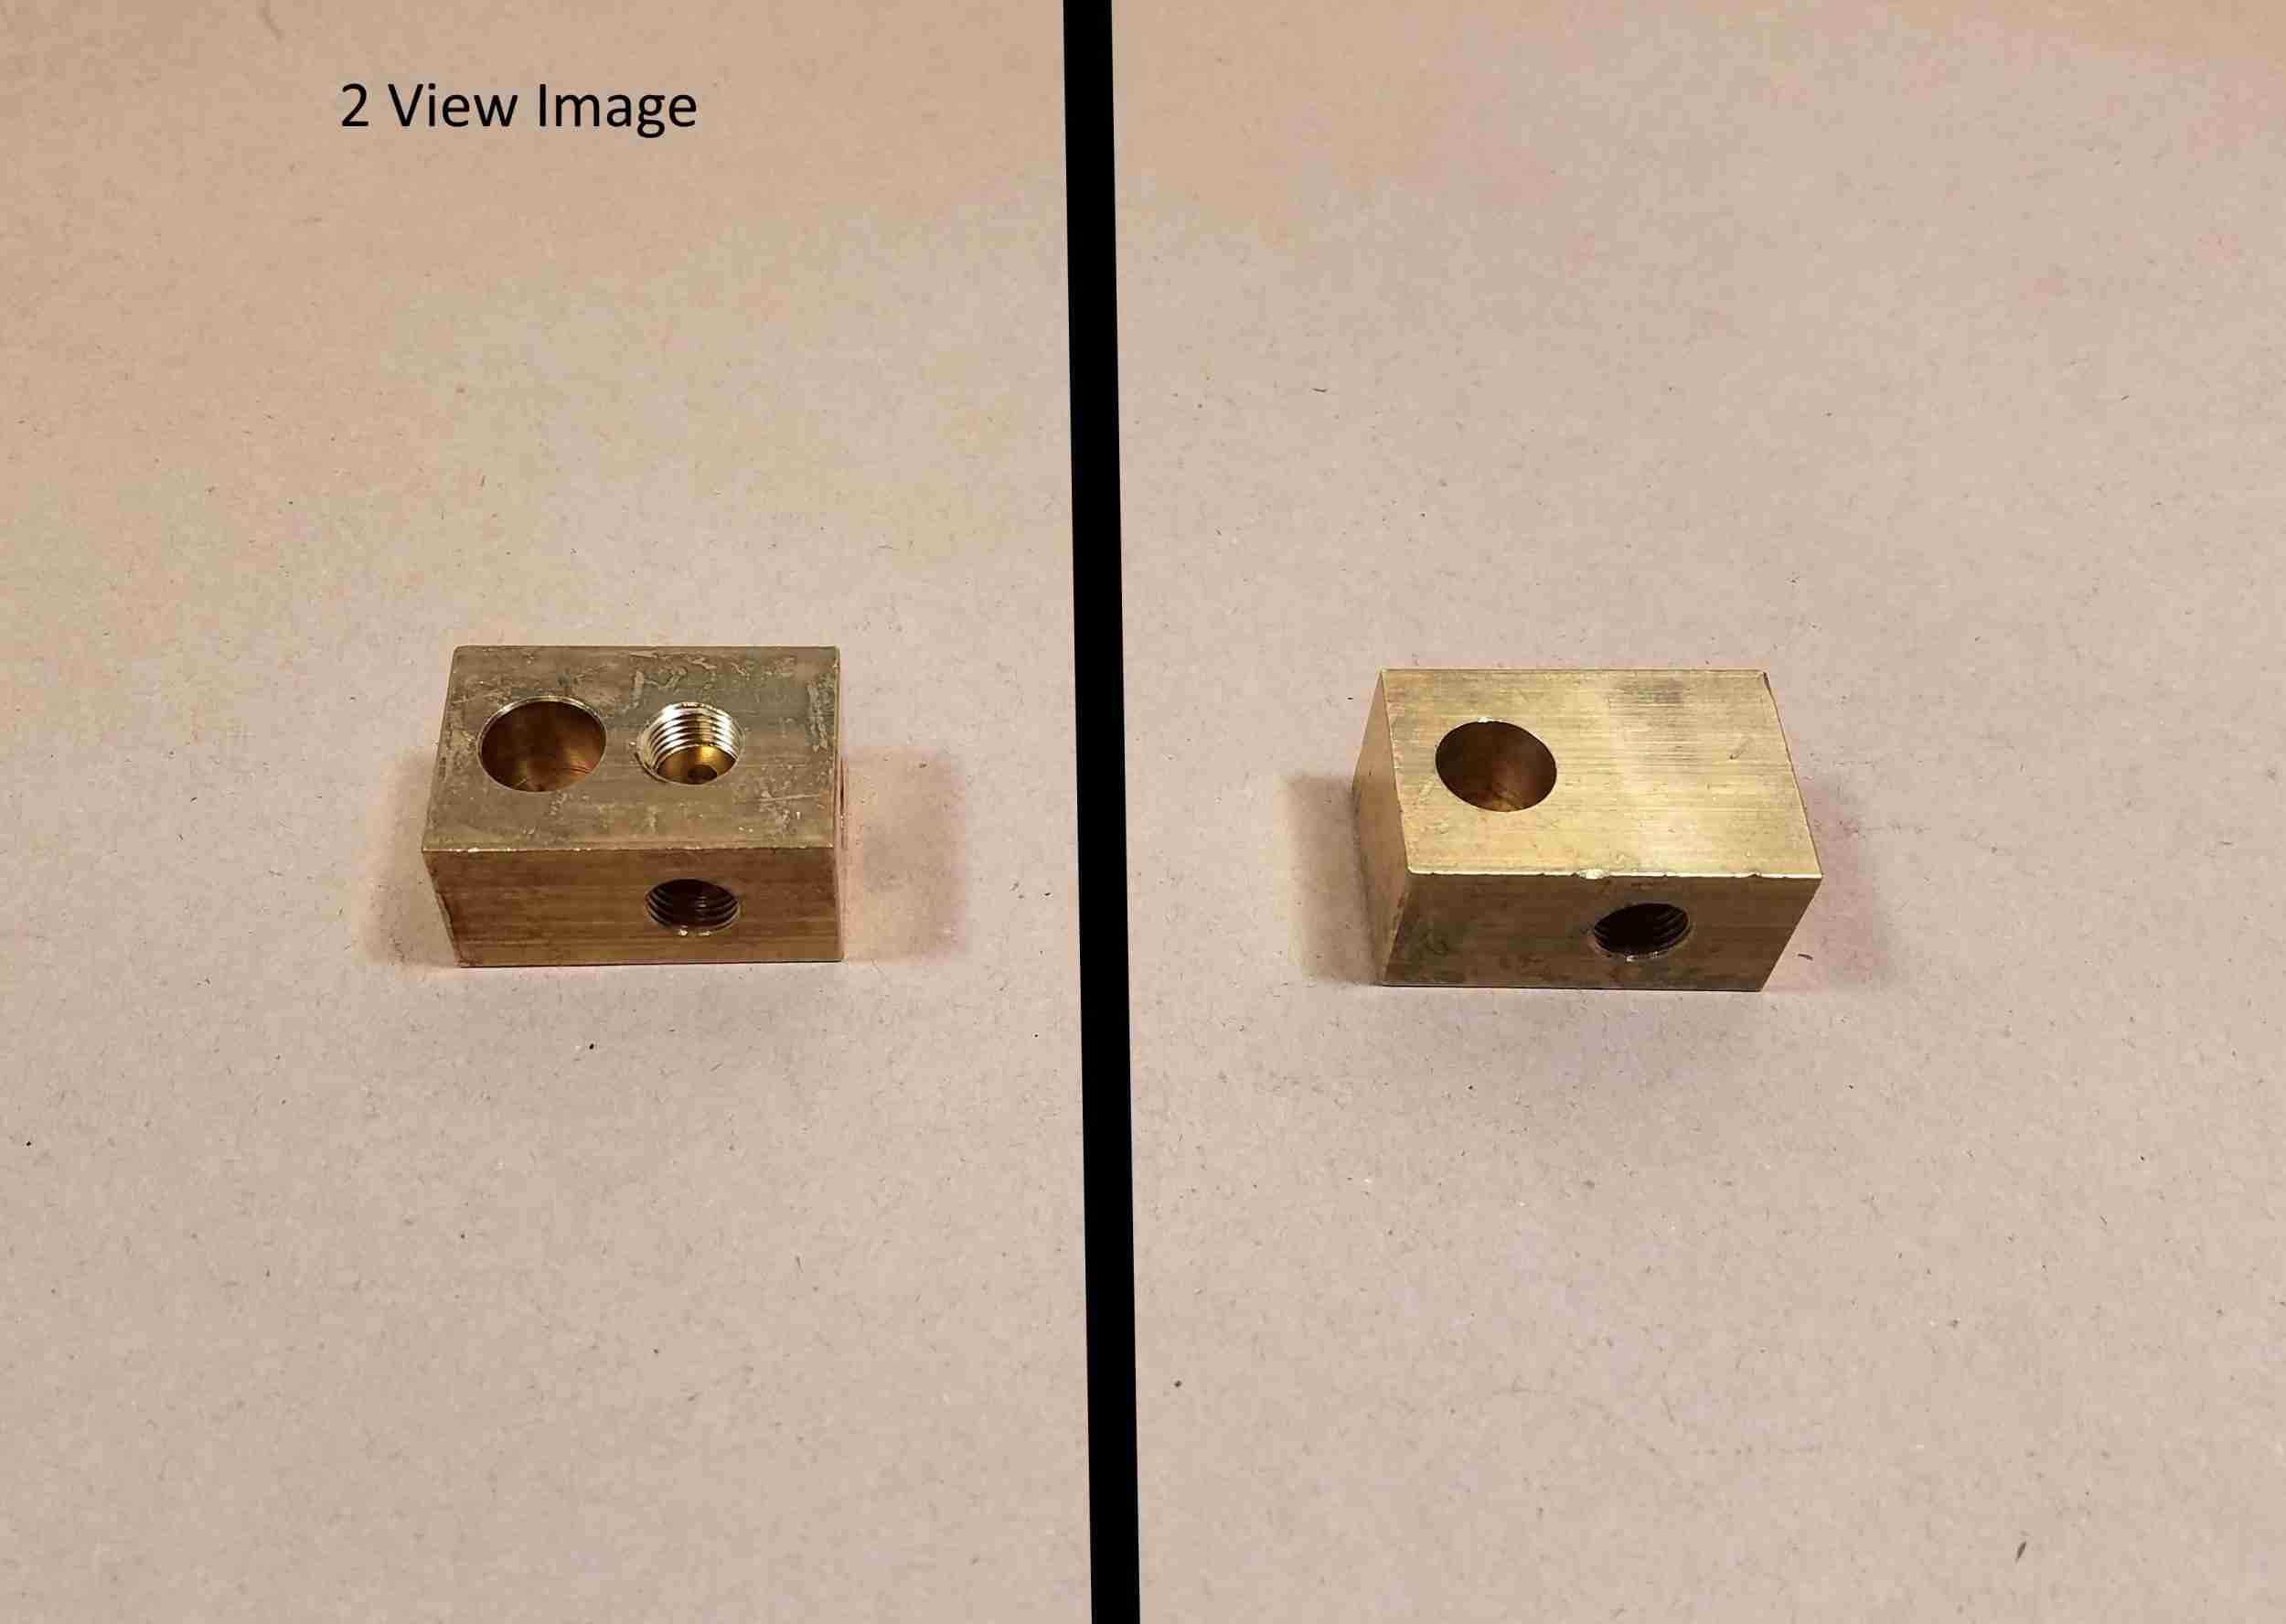 Brake Adapter T fitting - 4 way with 3-3/8" inverted flare female and 1-1/8" NPT female ports. This is a rectangular brass block and also is drilled for mounting Sell with 3 adapters CADTIF